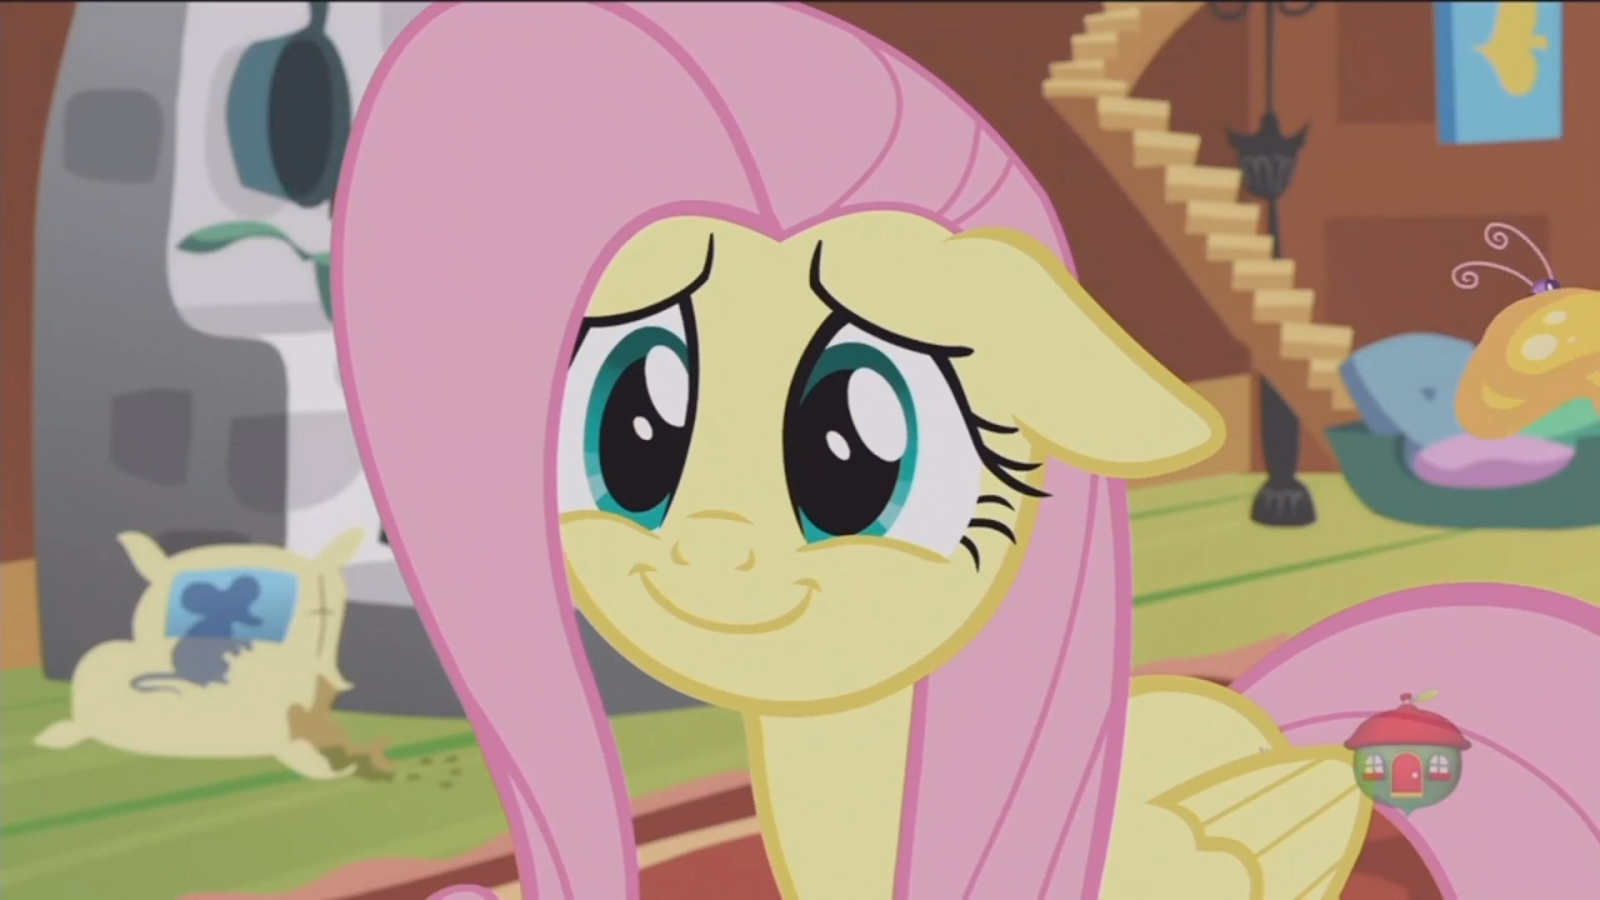 Equestria Daily - MLP Stuff!: "Fluttershy Leans In 